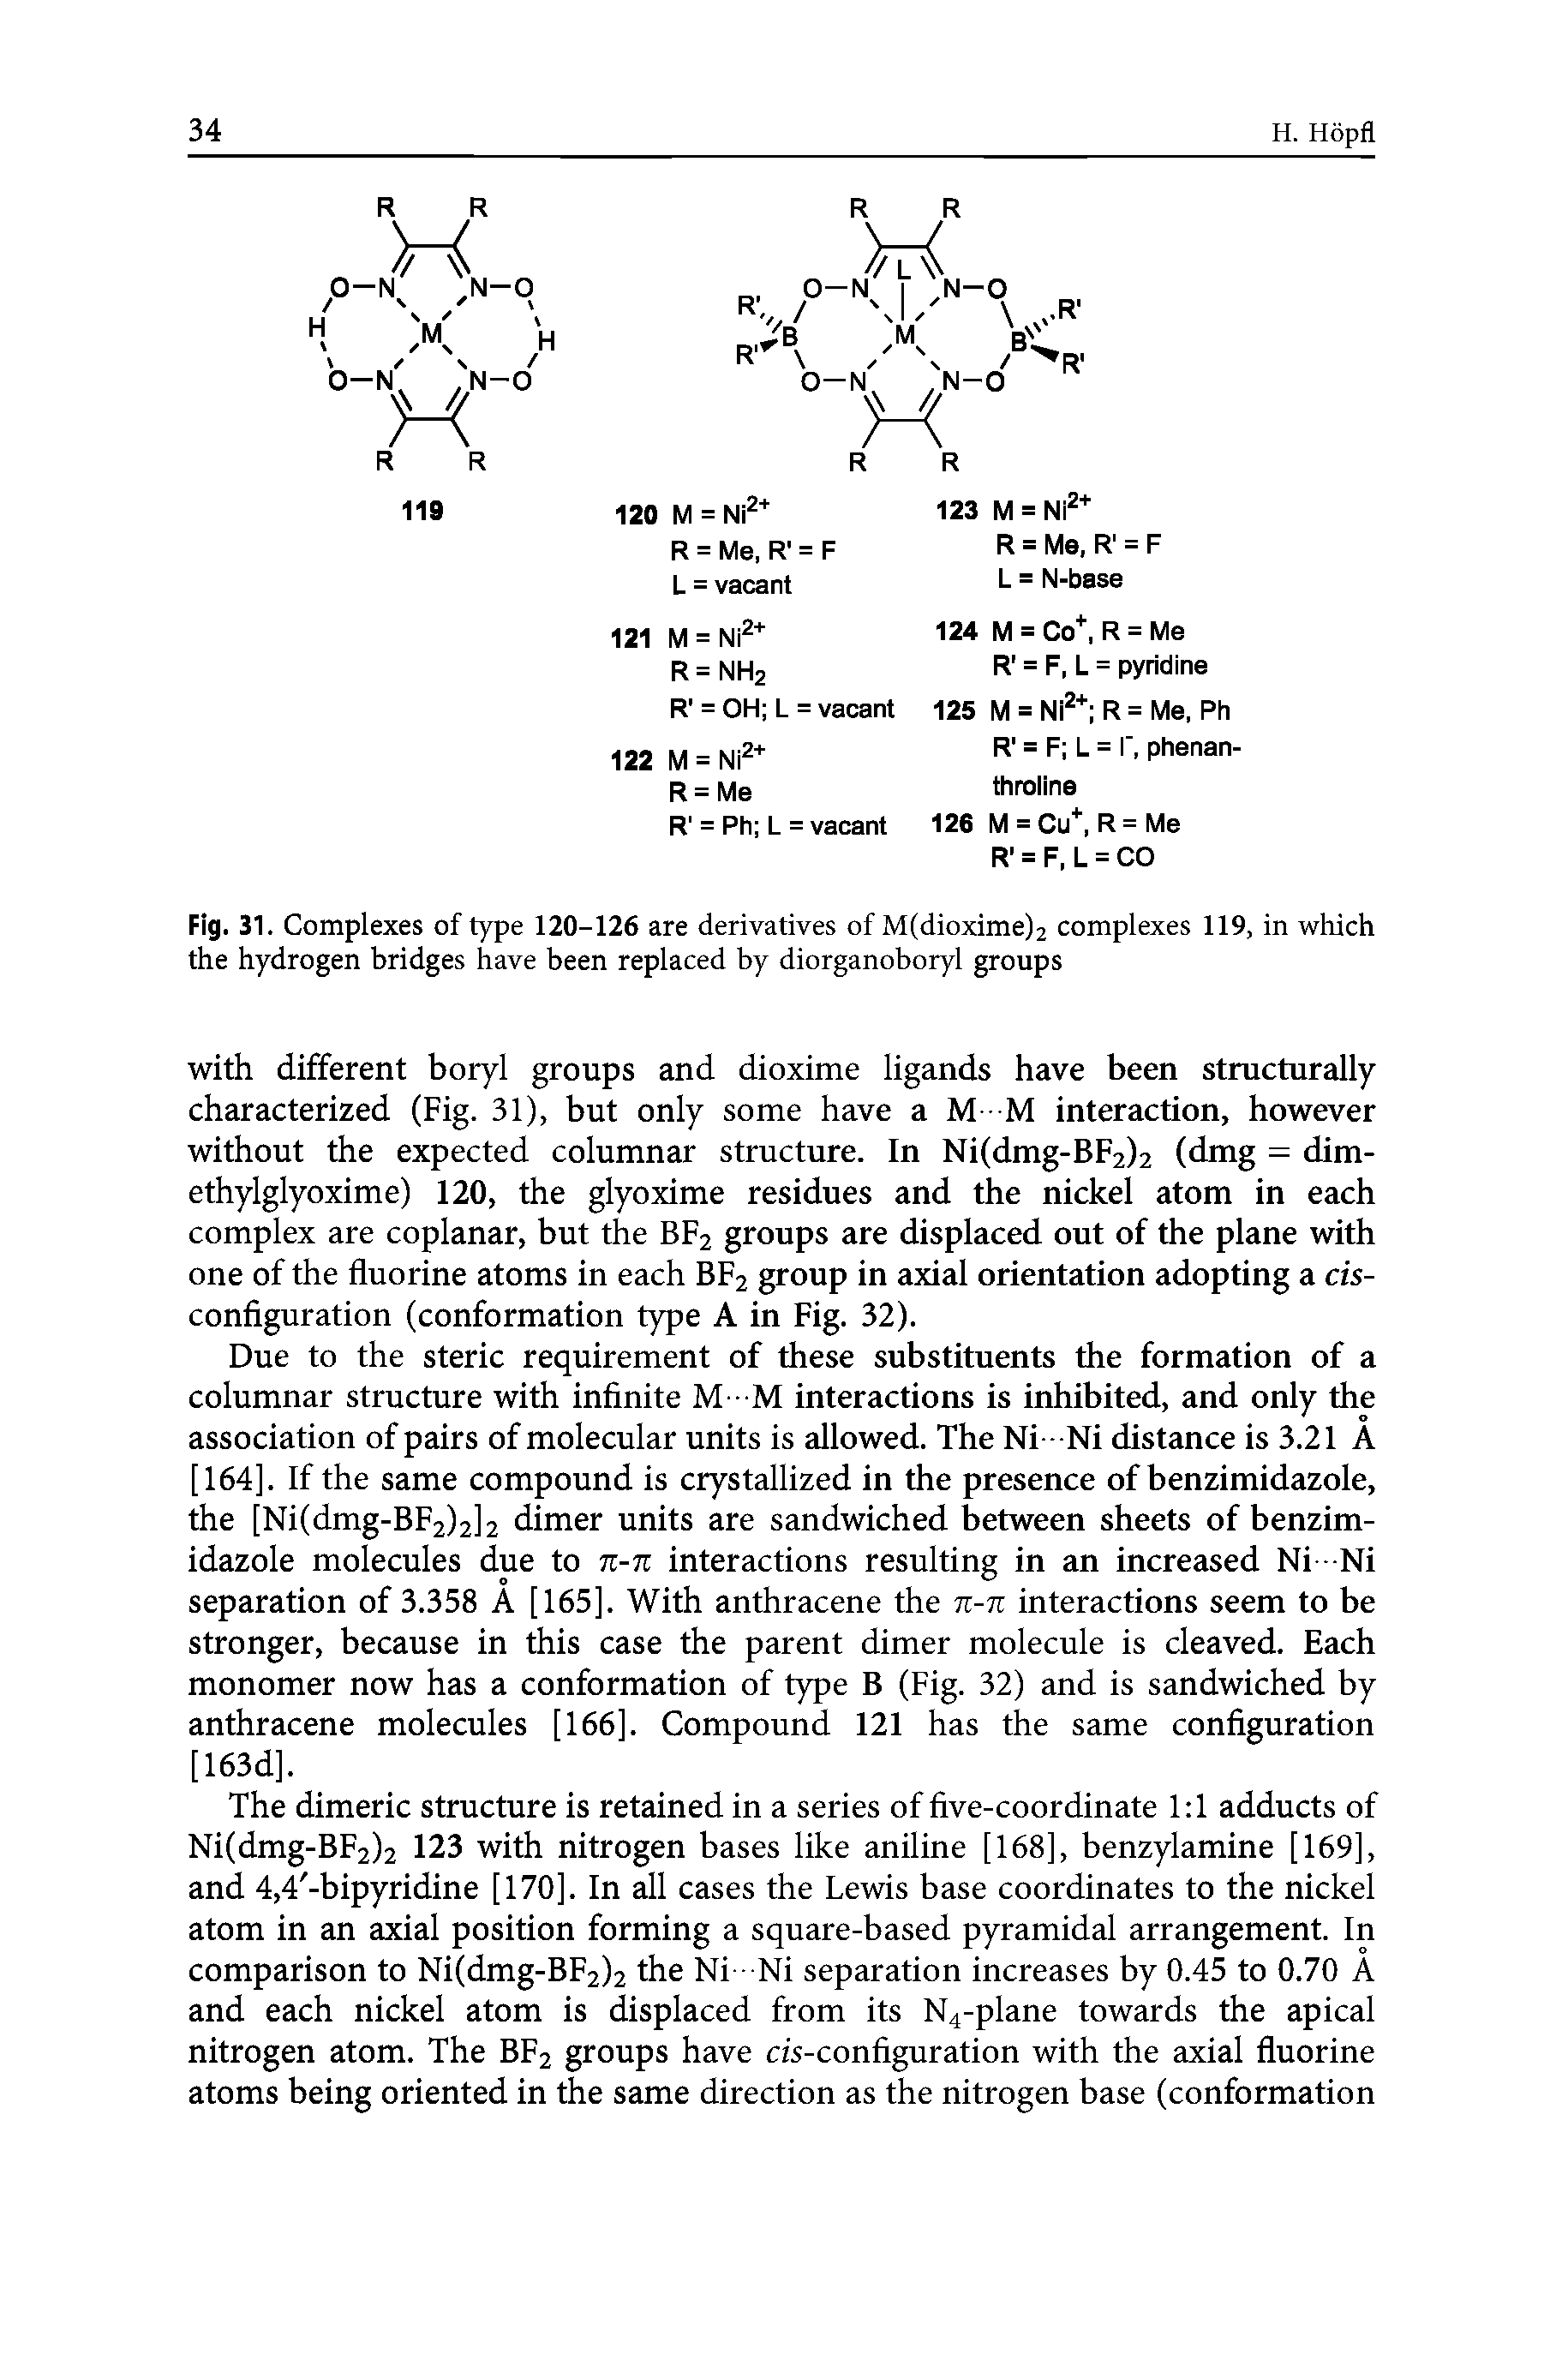 Fig. 31. Complexes of type 120-126 are derivatives of M(dioxime)2 complexes 119, in which the hydrogen bridges have been replaced by diorganoboryl groups...